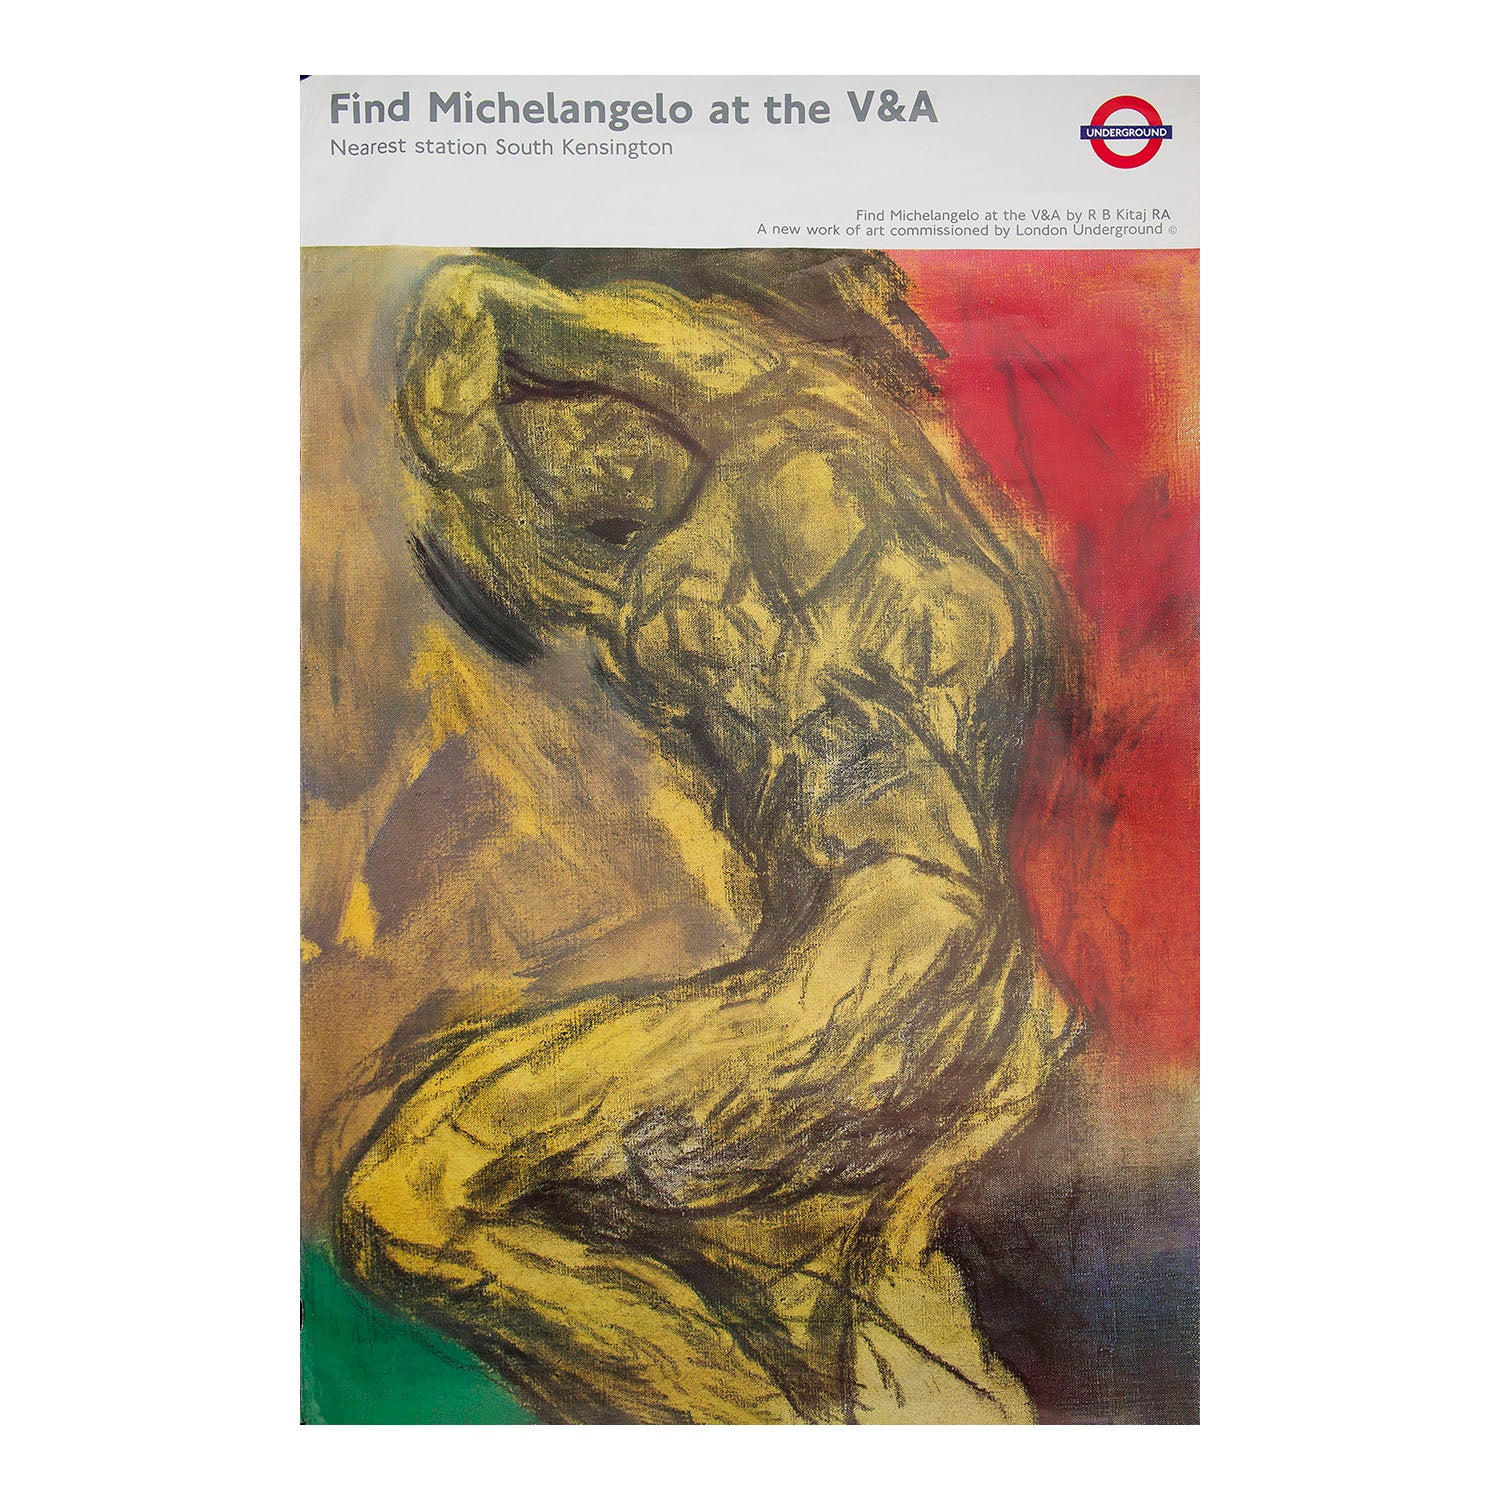 Original London Transport Poster designed by Ronald Brooks Kitaj for the Victoria and Albert (V&A) Museum, 1992.  The painting is inspired by Michelangelo's sculpture 'The Dying Slave'.